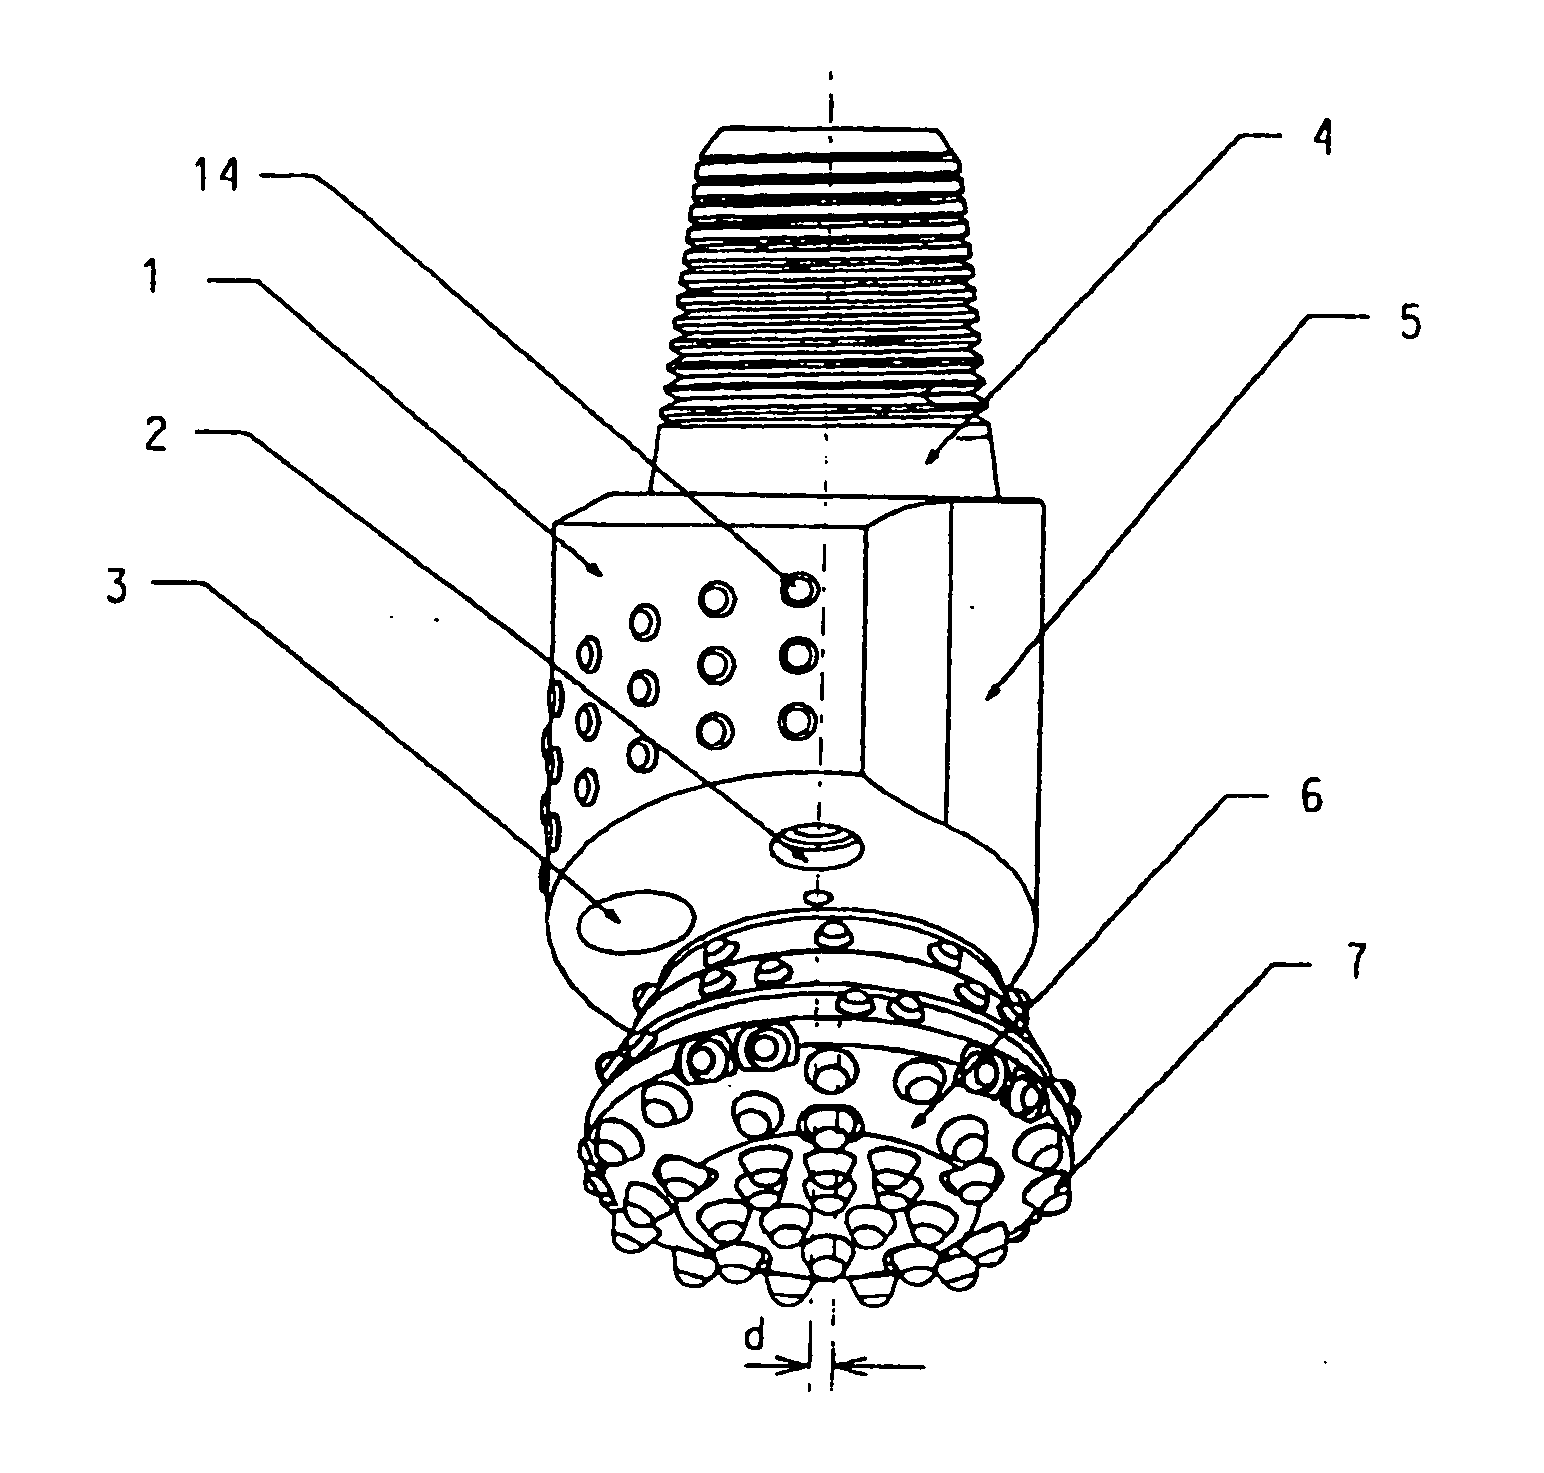 Roller bit with a journal pin offset from the central axis thereof